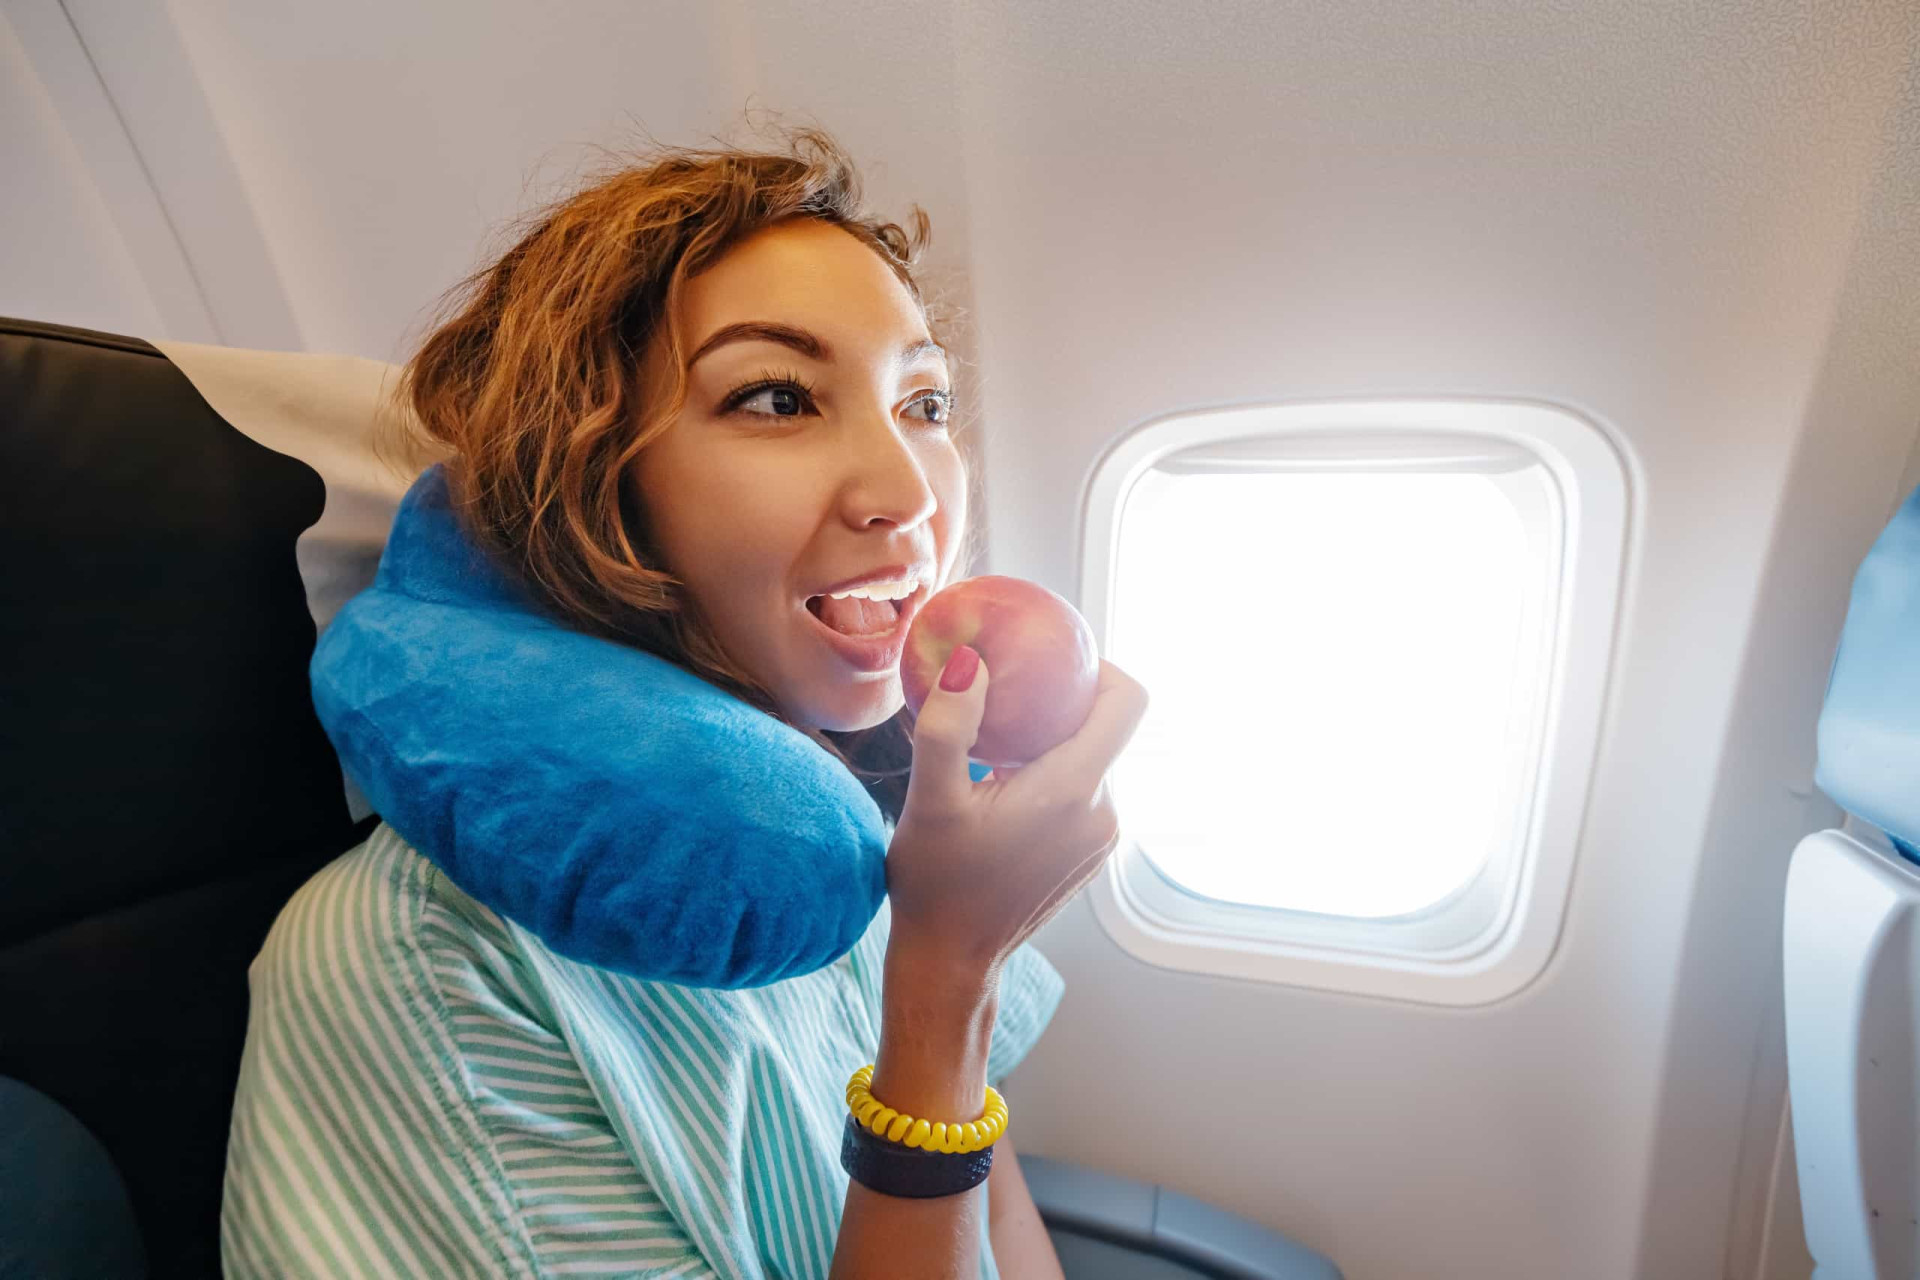 <p>Airline food isn't always filling, even on long-haul flights, and it's important to stay well nourished. You won't be sorry to find fruit or granola bars in your carry-on.</p><p><a href="https://www.msn.com/en-us/community/channel/vid-7xx8mnucu55yw63we9va2gwr7uihbxwc68fxqp25x6tg4ftibpra?cvid=94631541bc0f4f89bfd59158d696ad7e">Follow us and access great exclusive content every day</a></p>